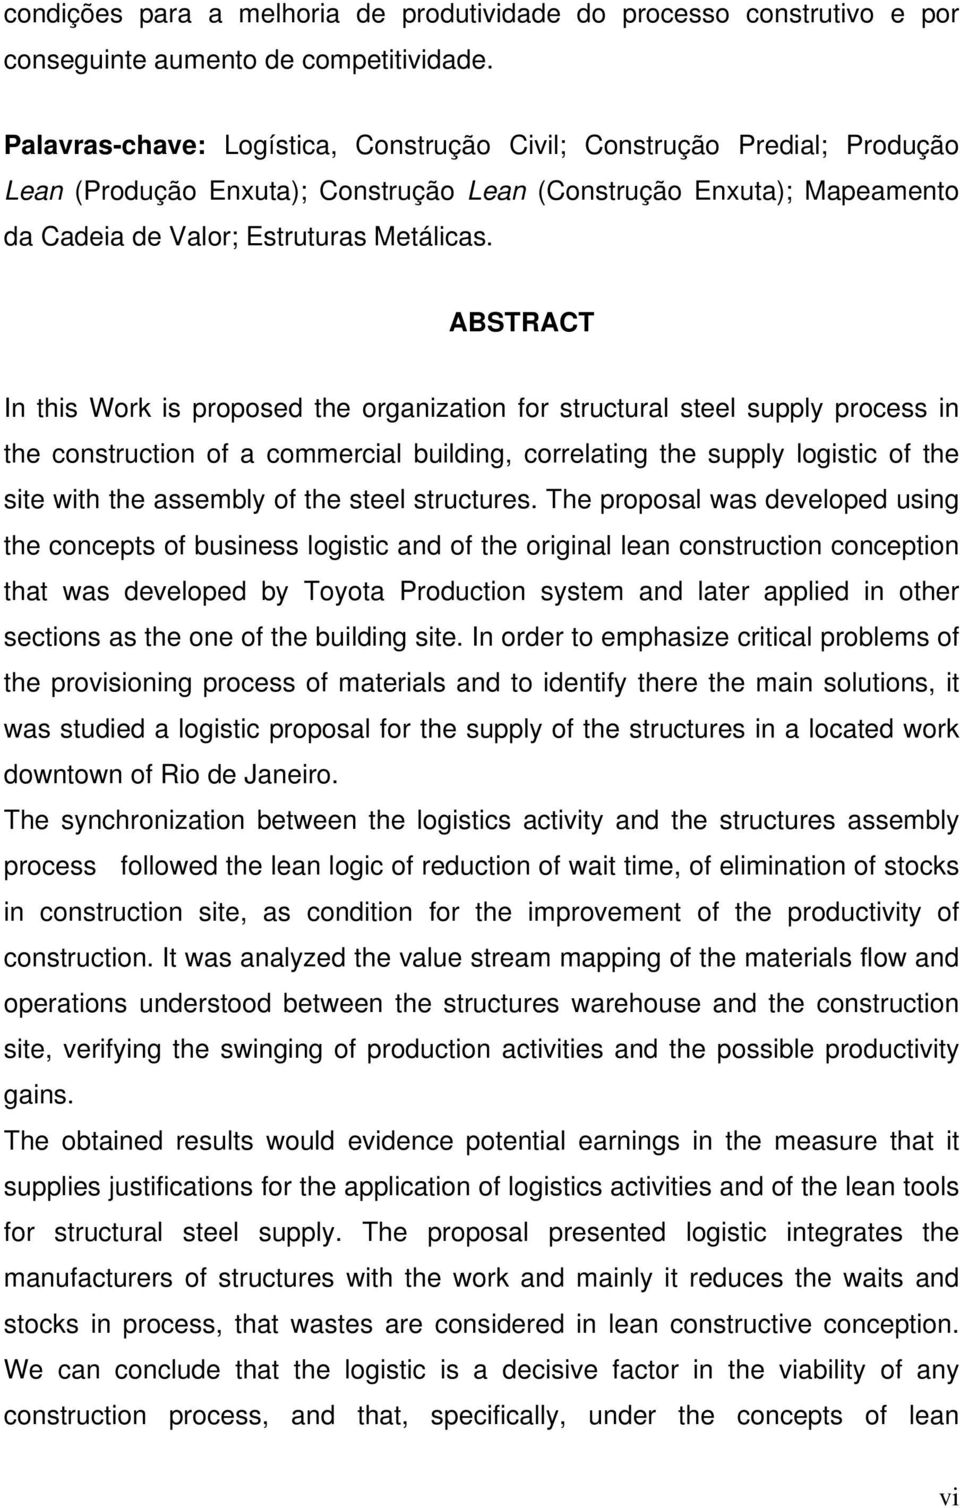 ABSTRACT In this Work is proposed the organization for structural steel supply process in the construction of a commercial building, correlating the supply logistic of the site with the assembly of